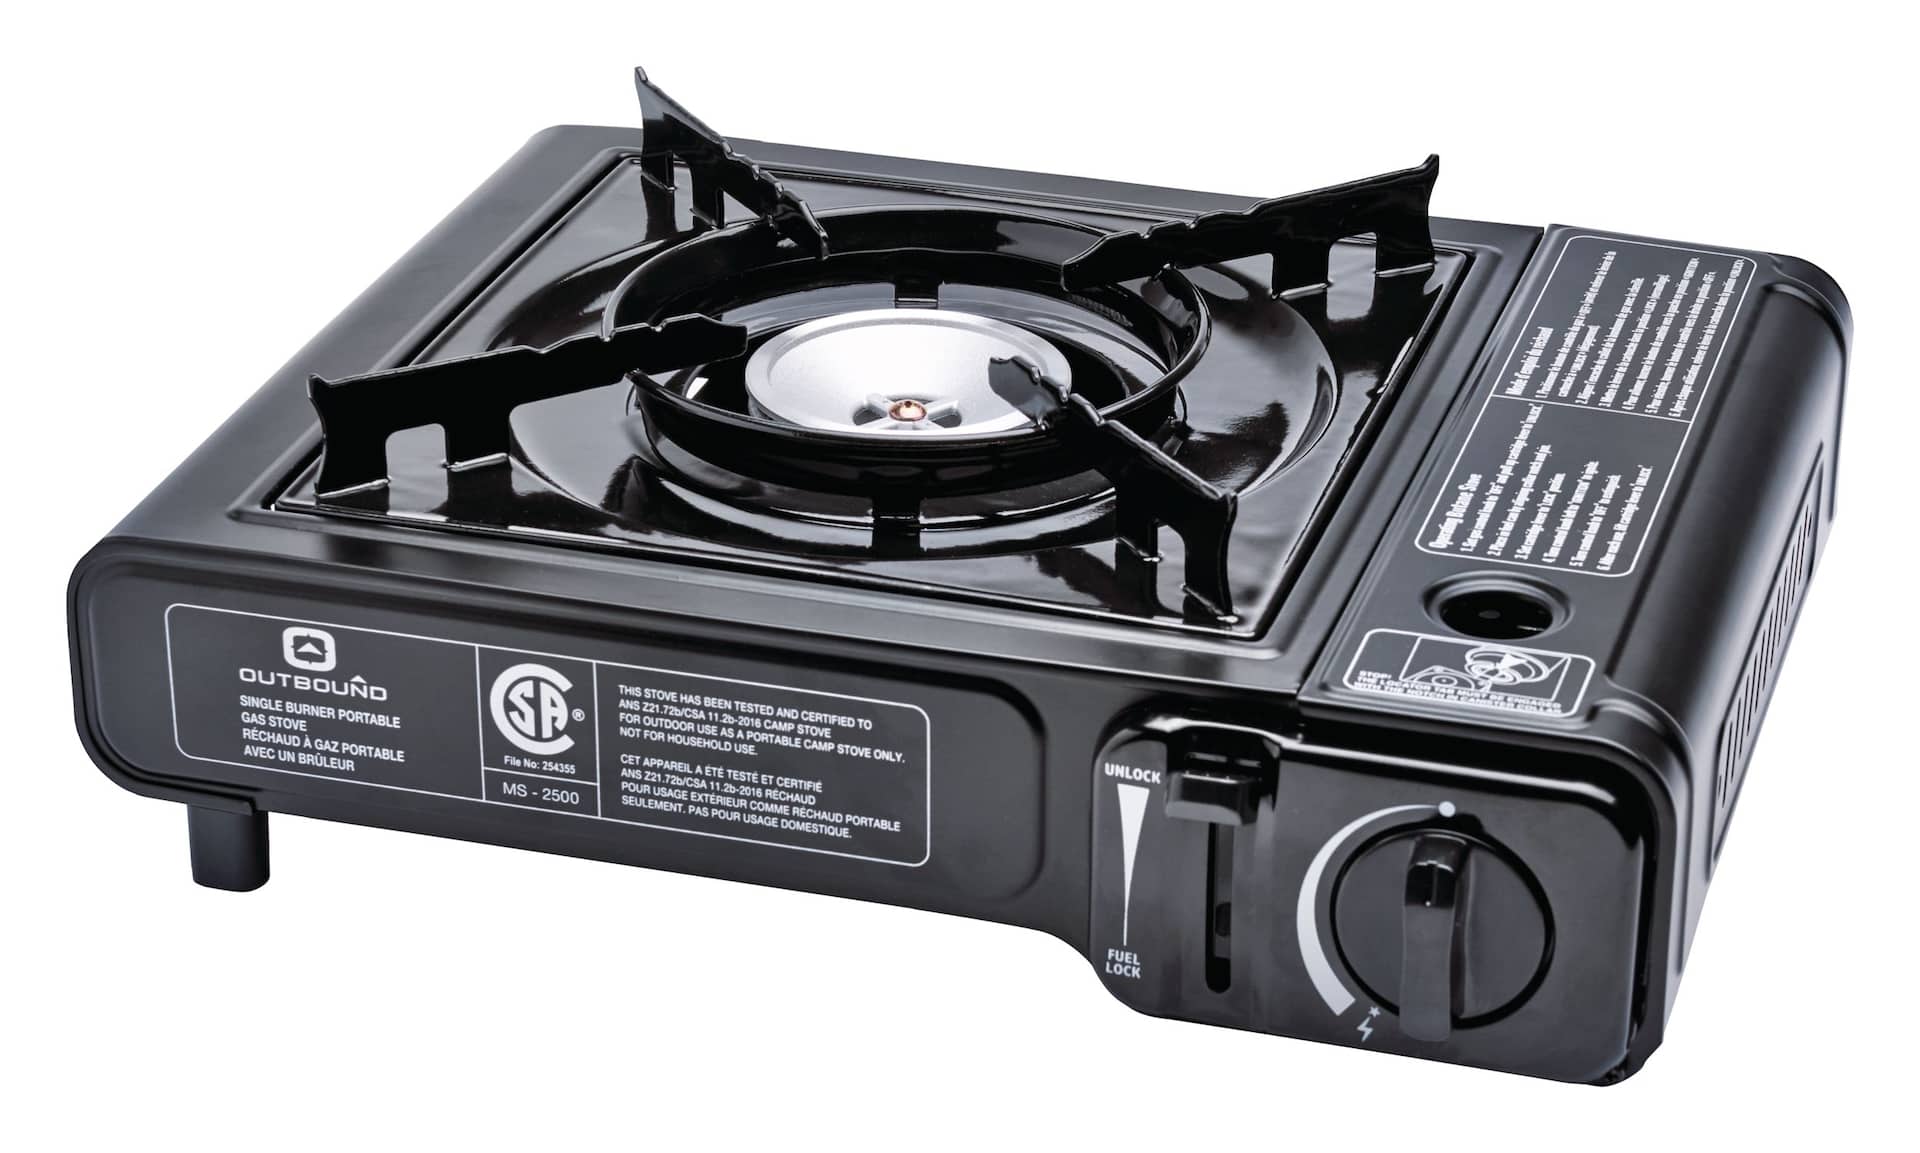 https://media-www.canadiantire.ca/product/playing/camping/camping-living/0765616/outbound-butane-stove-with-case-e0d1f787-3214-400f-b0e2-3a705350183f-jpgrendition.jpg